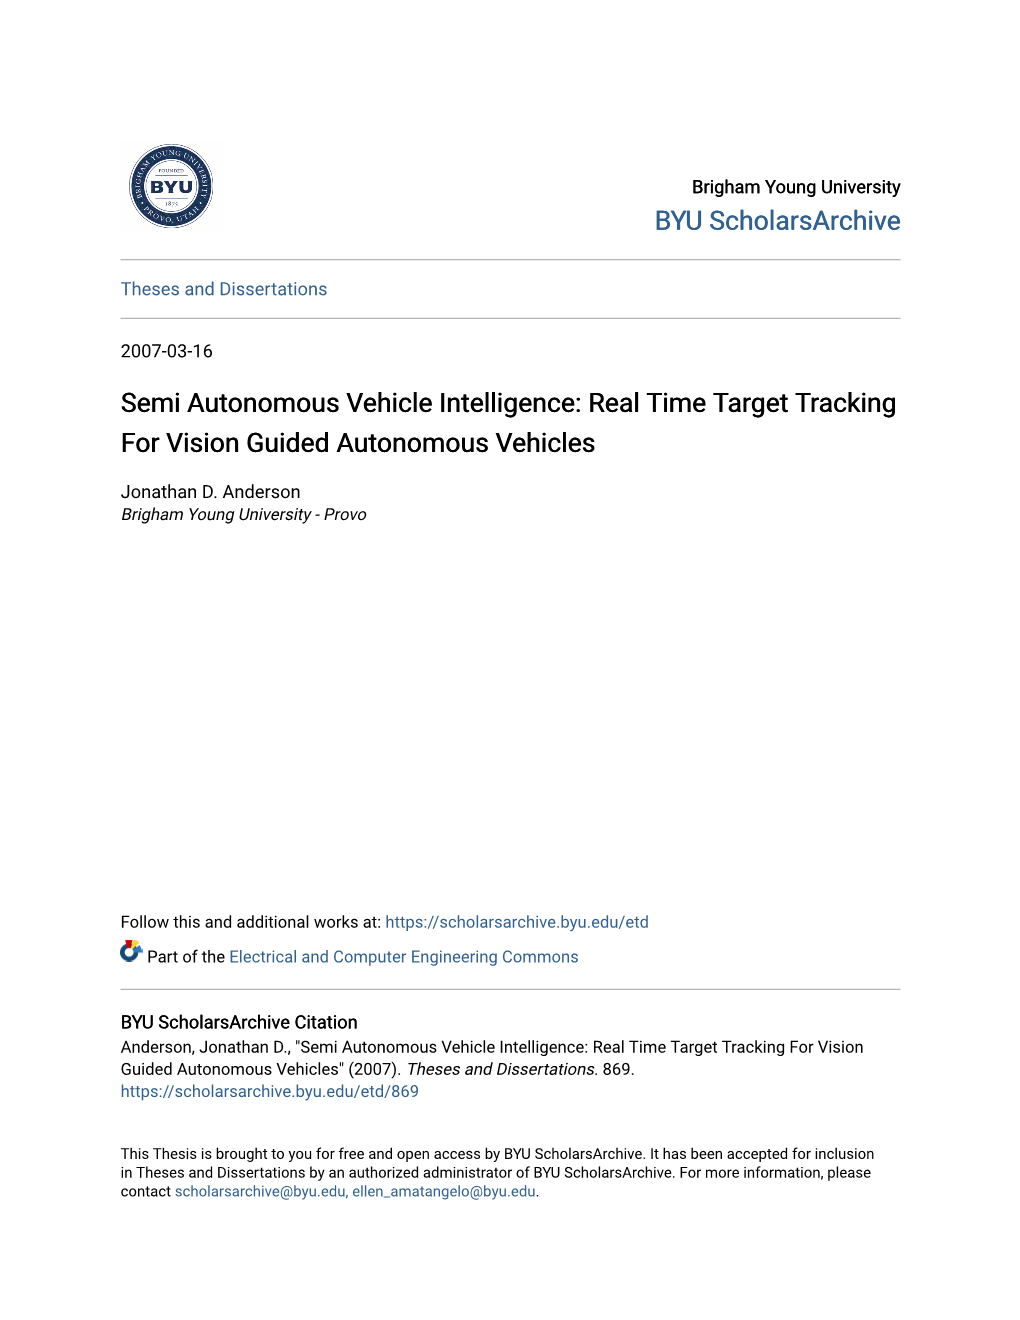 Semi Autonomous Vehicle Intelligence: Real Time Target Tracking for Vision Guided Autonomous Vehicles